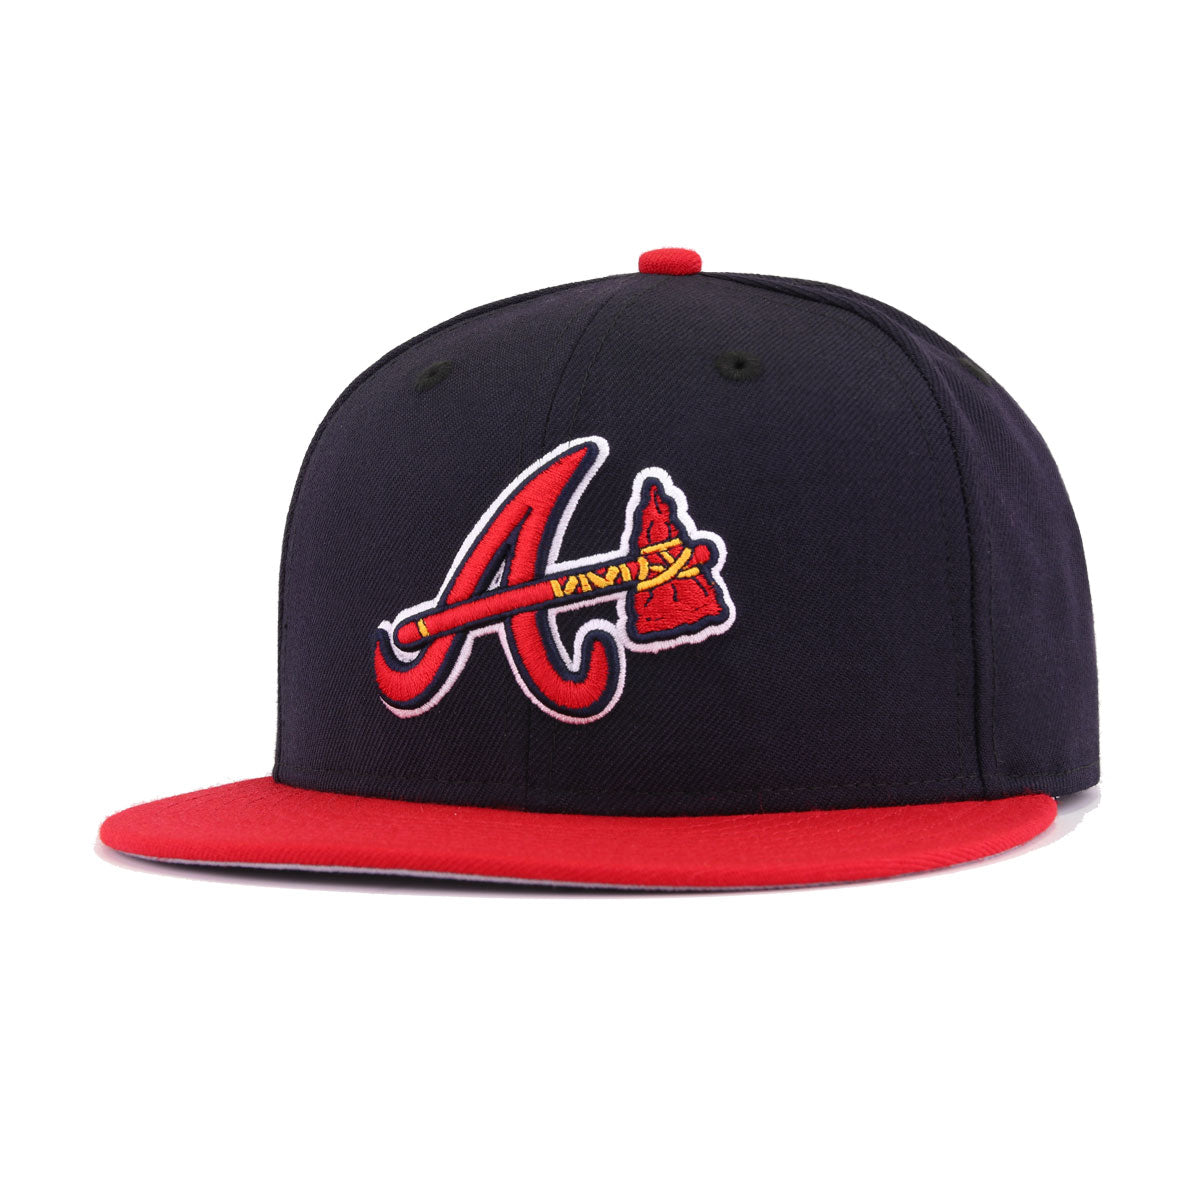 Vintage Atlanta Braves Fitted Hat New Era Made USA Size 7 1/8 